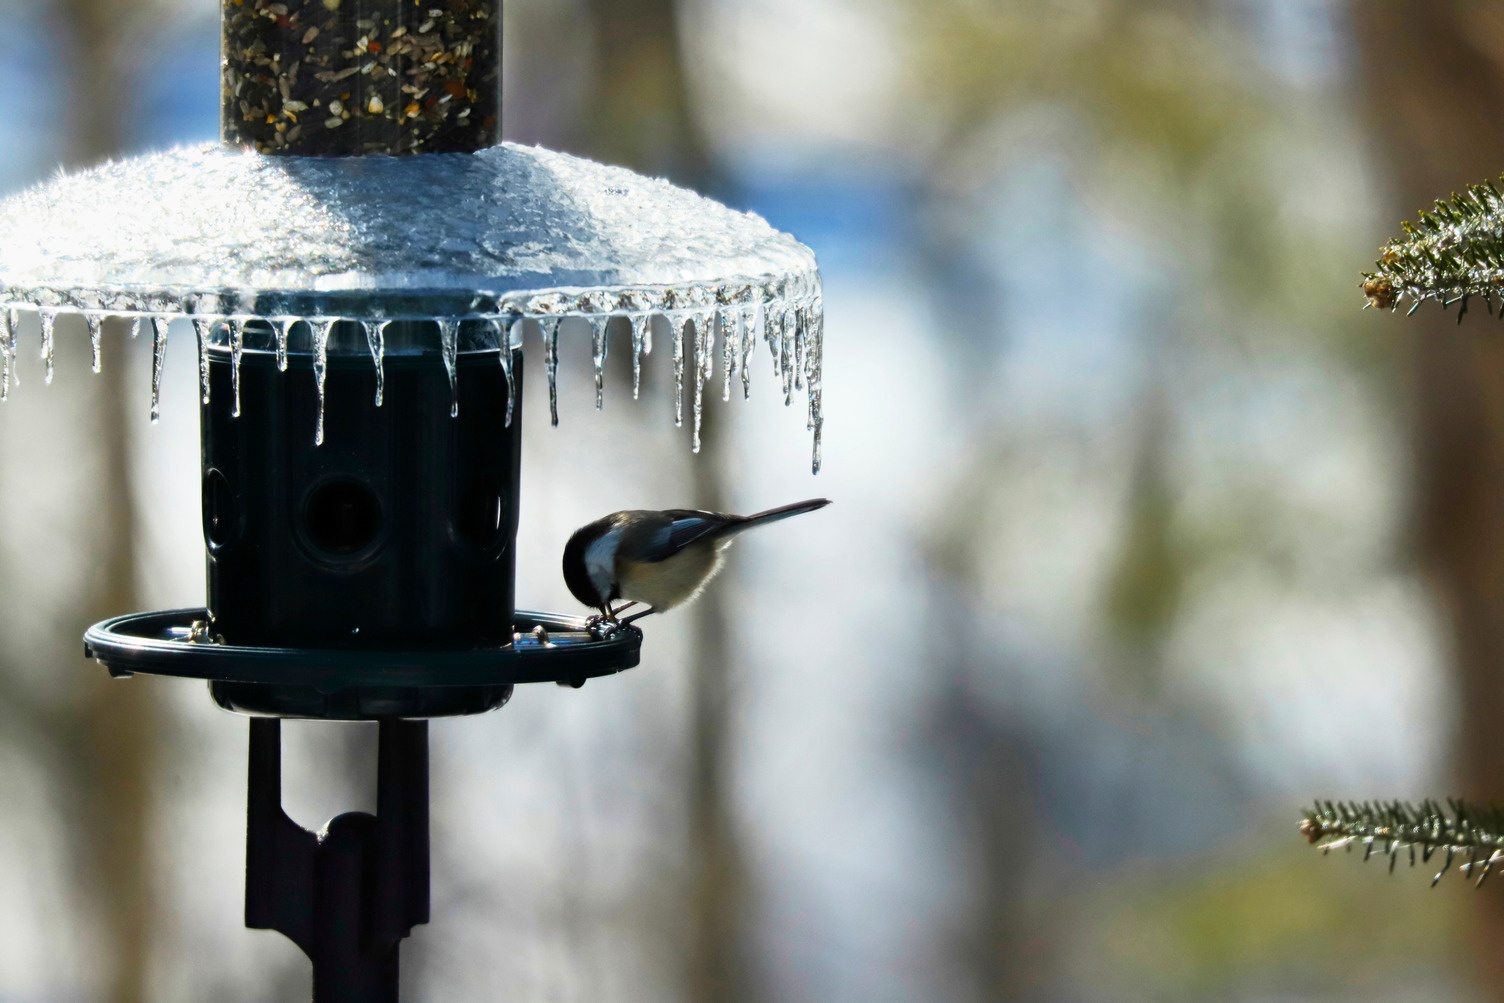 A small bird eats from a bird feeder that has icicles on it.